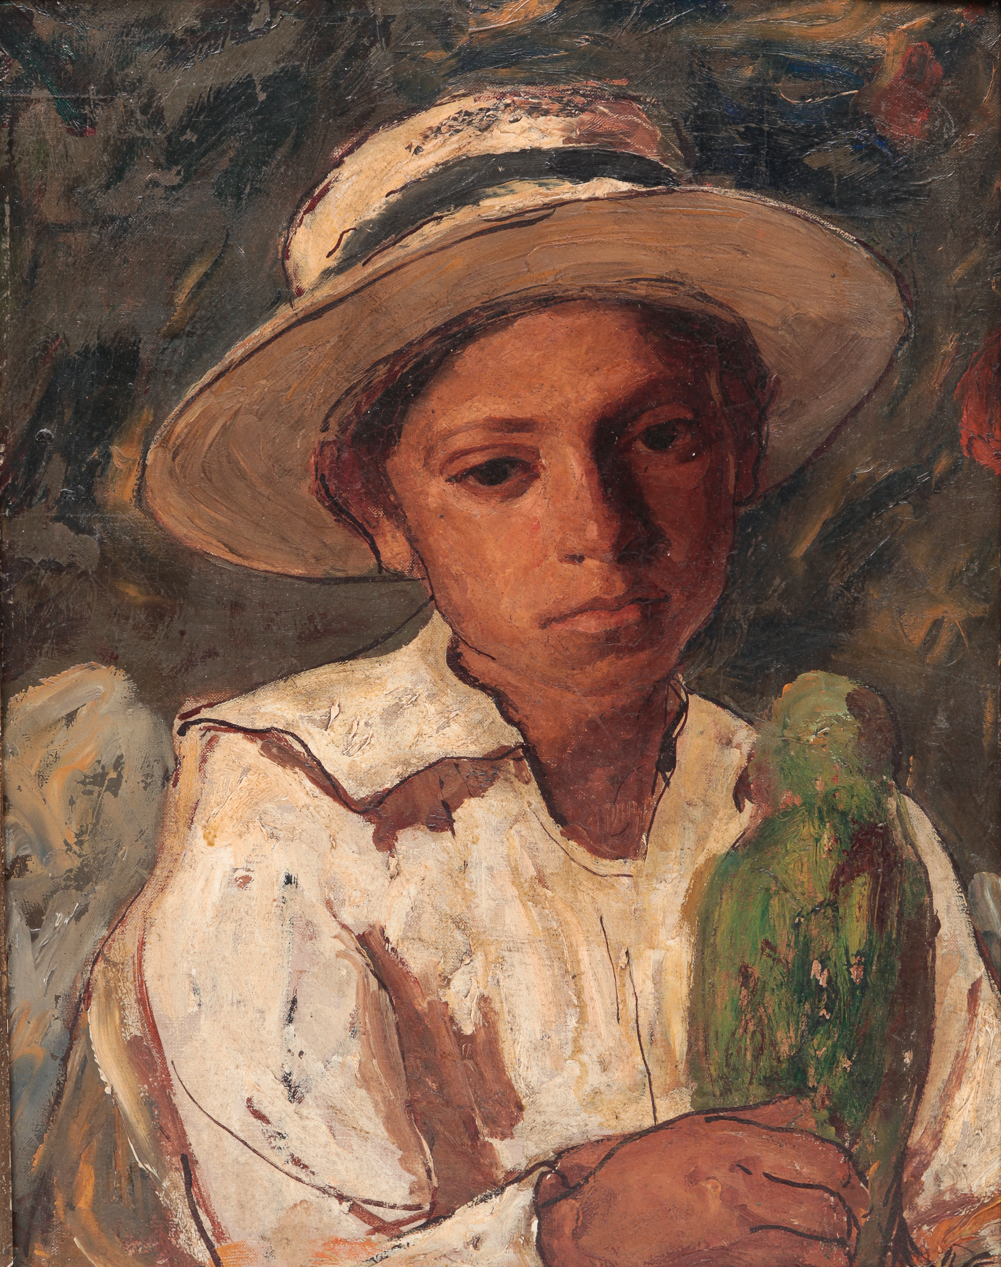 BOY WITH PARROT BY ROBERT BOLLING 2dfc44